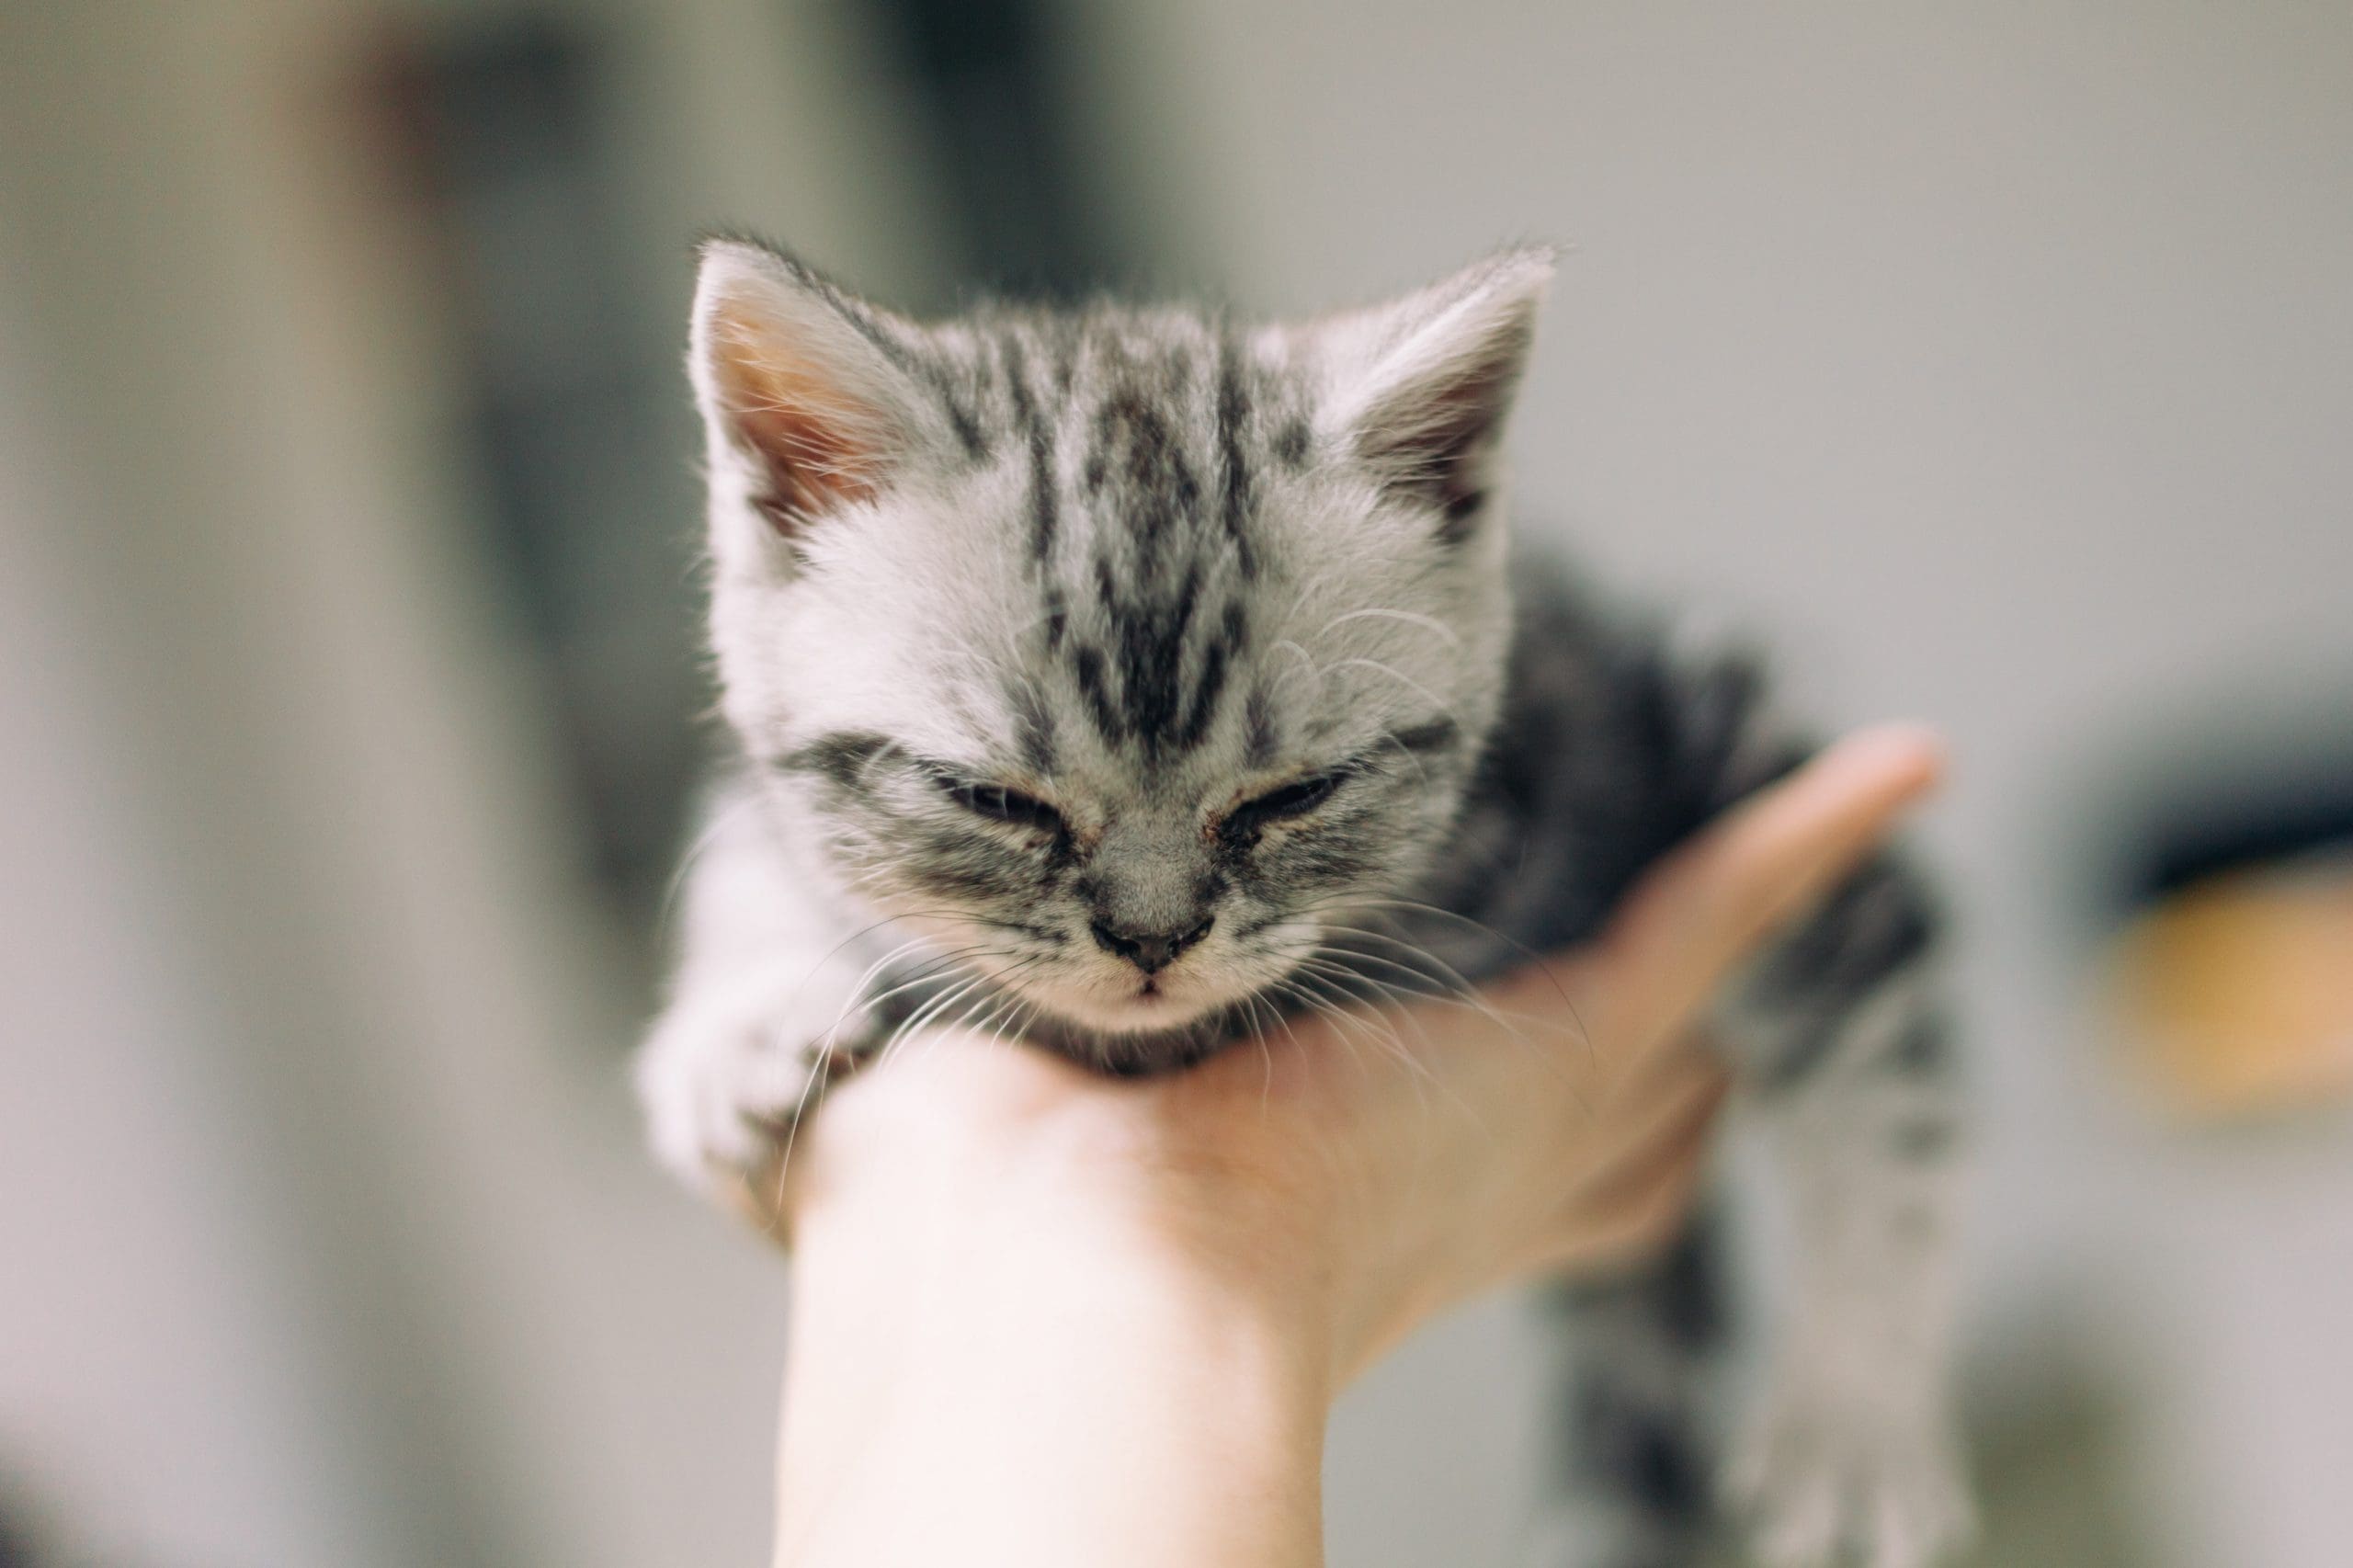 The VA Is Abusing And Killing 6-Month-Old Kittens On Your Dime: Together We Can Make Them Stop